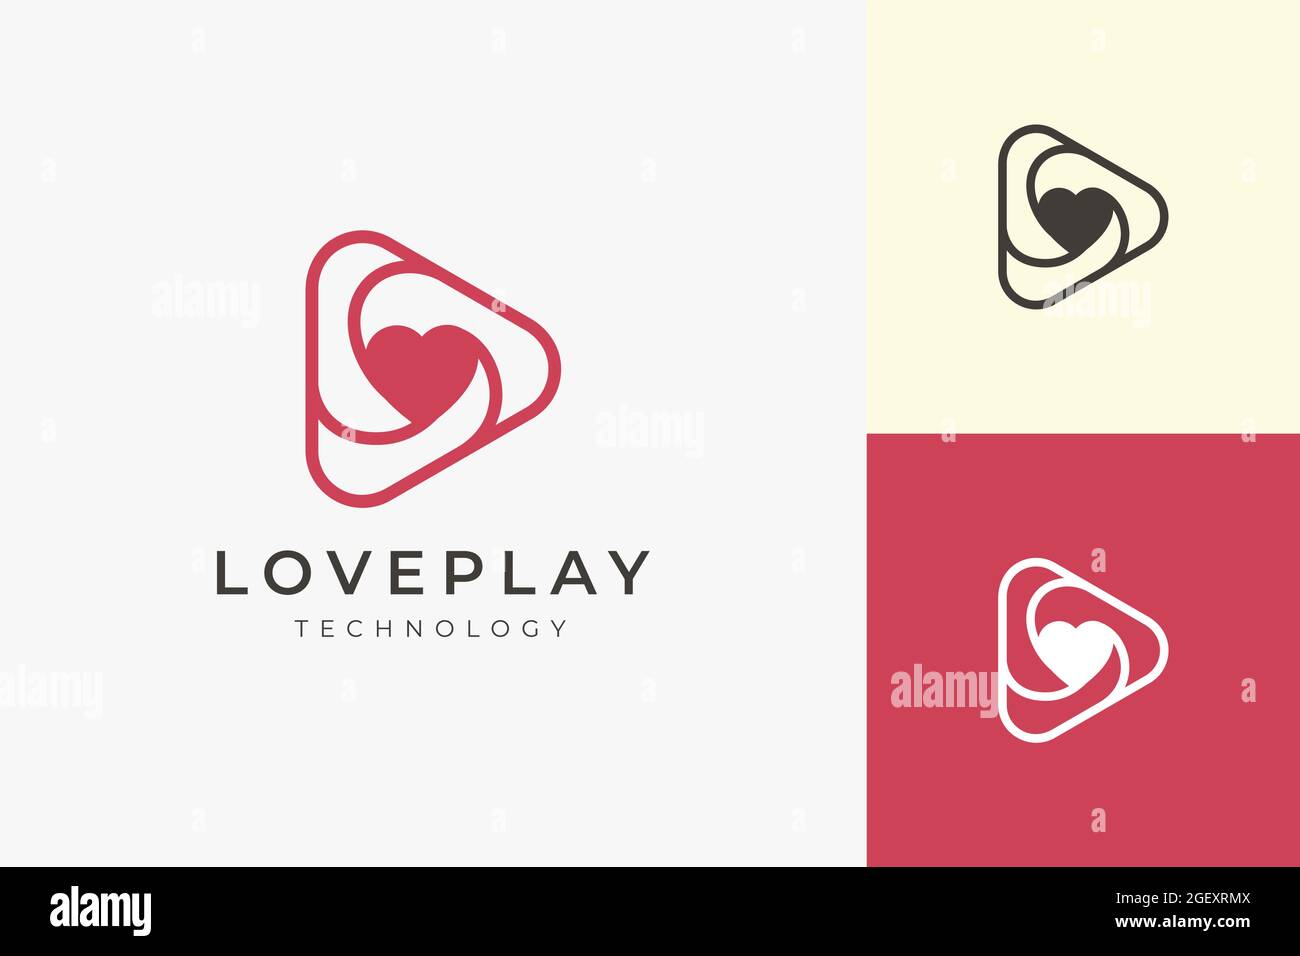 Romance on love logo with clean and simple triangle play shape Stock Vector